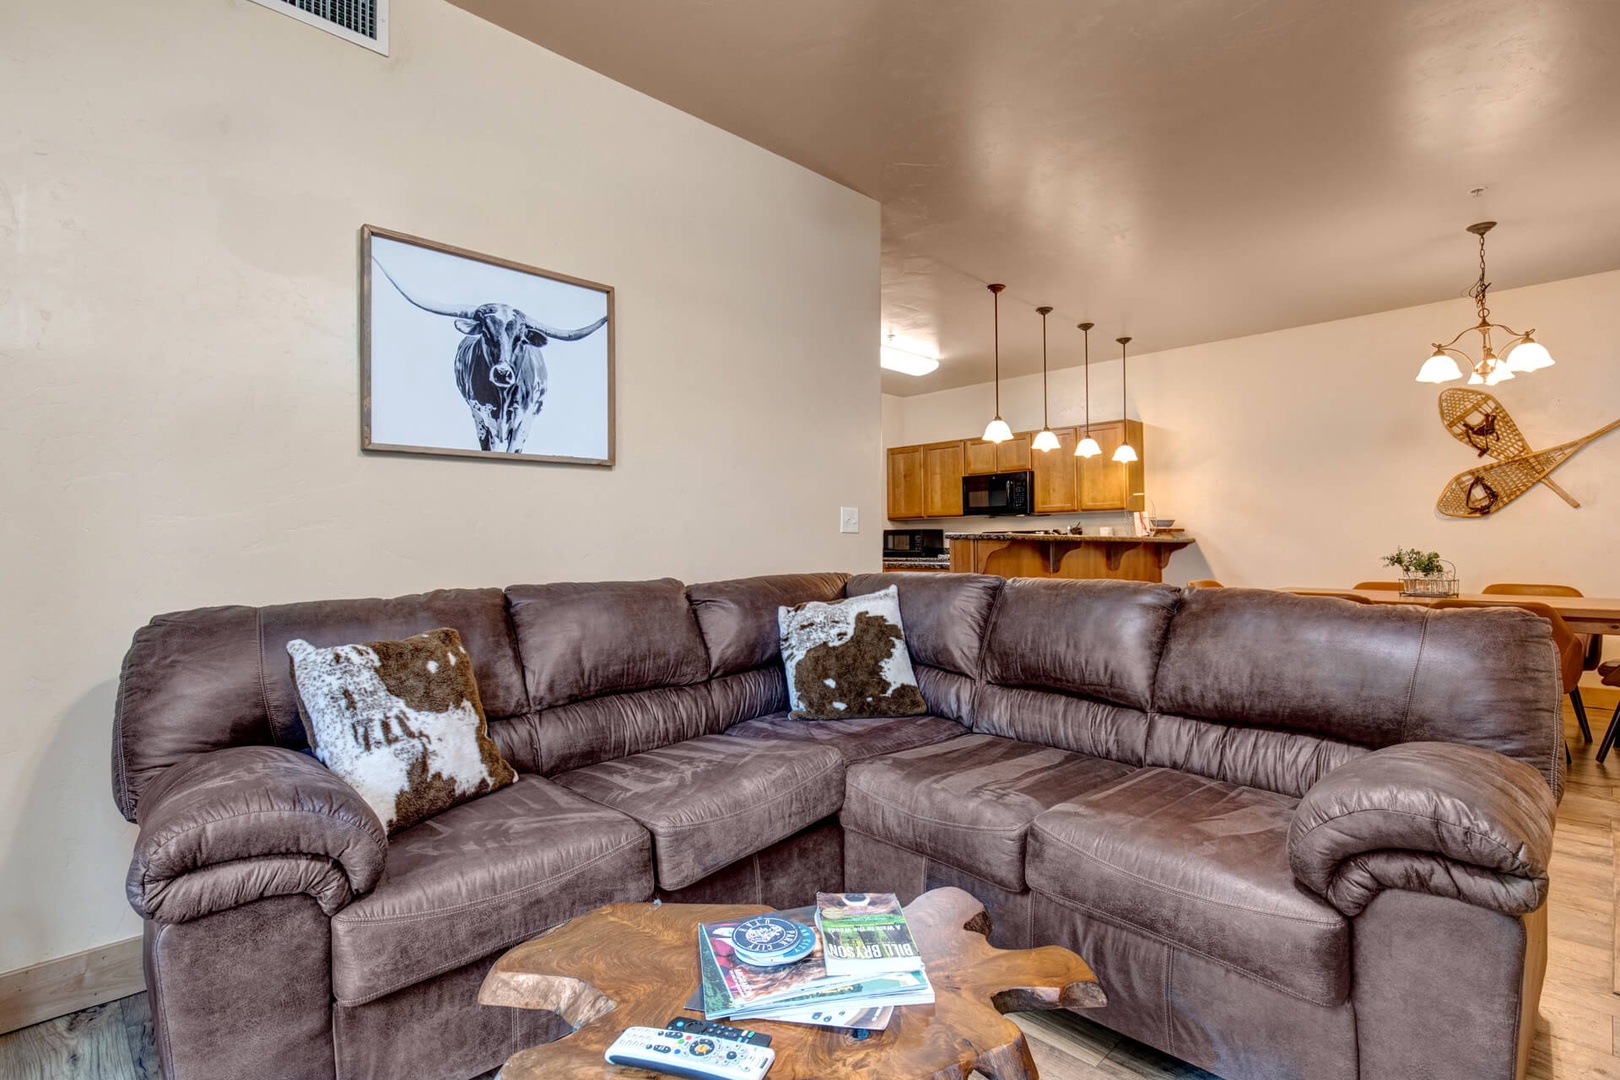 Bear Hollow Lodges 1104: A comfortable sectional sofa in the living room for gathering or games.